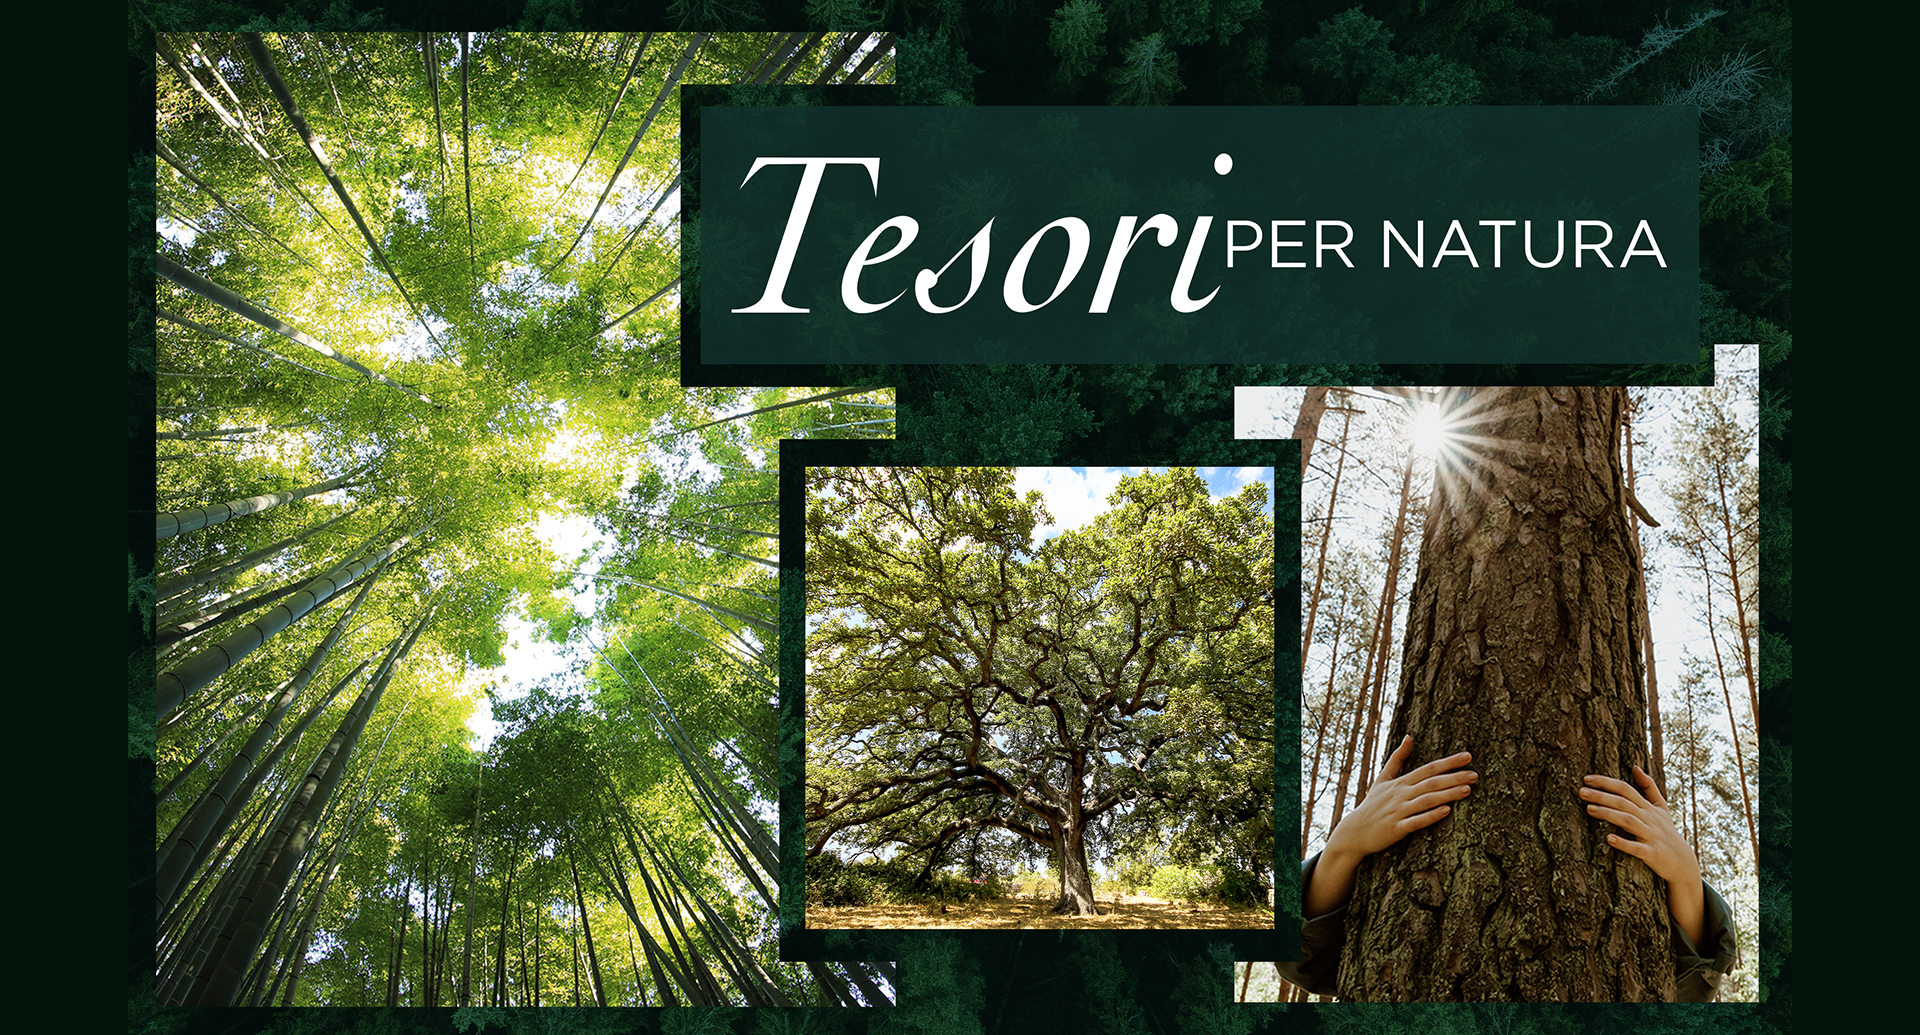 	Tesori d'Oriente protects Italy's natural heritage with the "Tesori per Natura" (Treasures for Nature) project